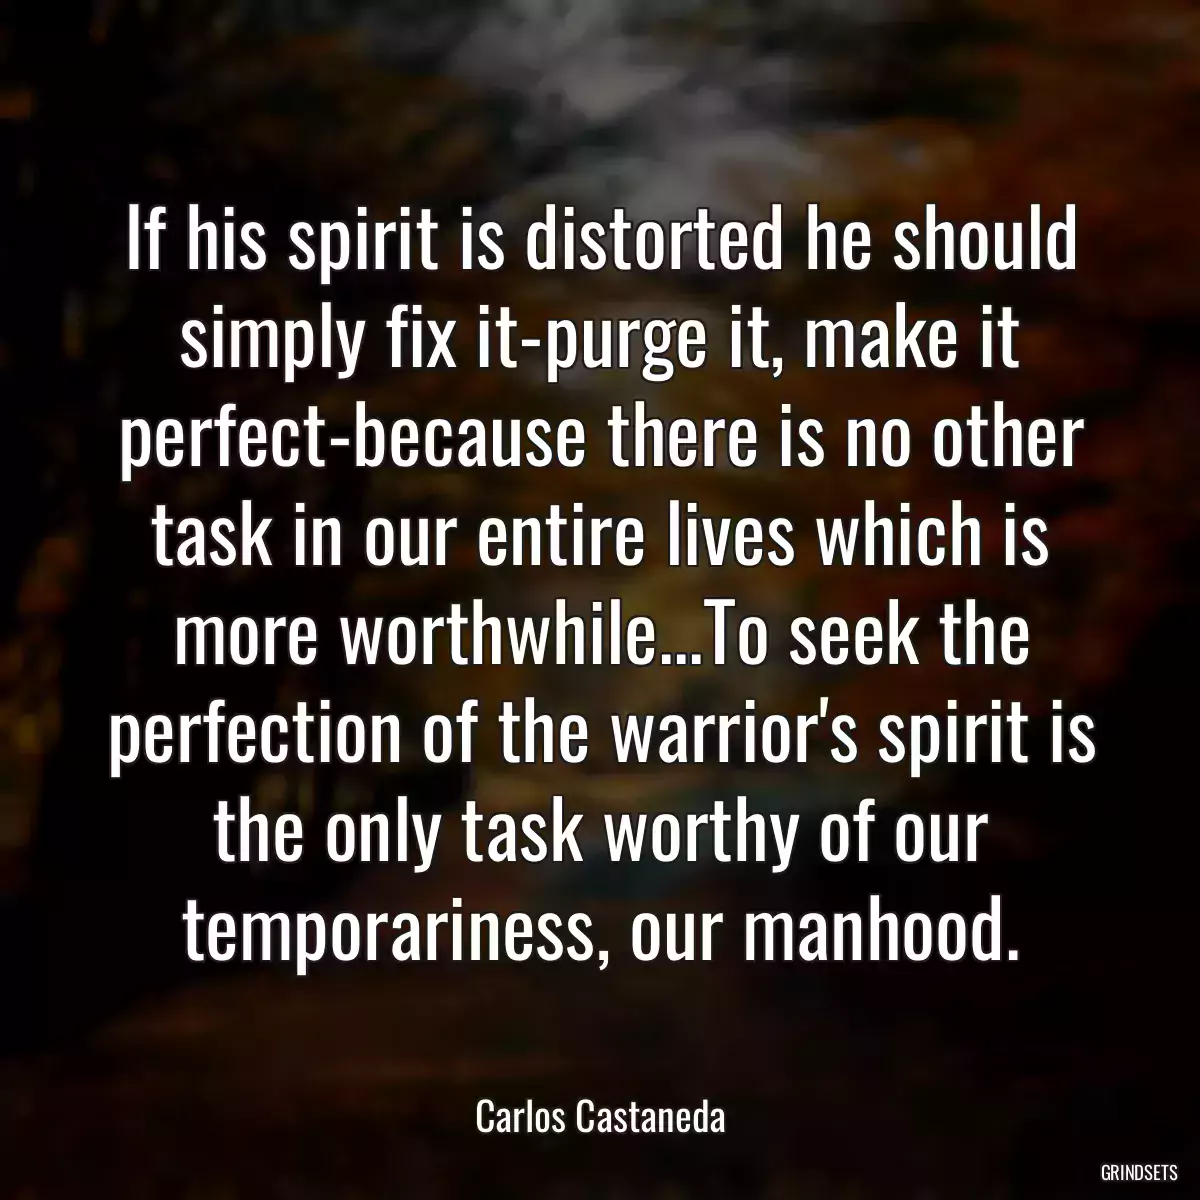 If his spirit is distorted he should simply fix it-purge it, make it perfect-because there is no other task in our entire lives which is more worthwhile...To seek the perfection of the warrior\'s spirit is the only task worthy of our temporariness, our manhood.